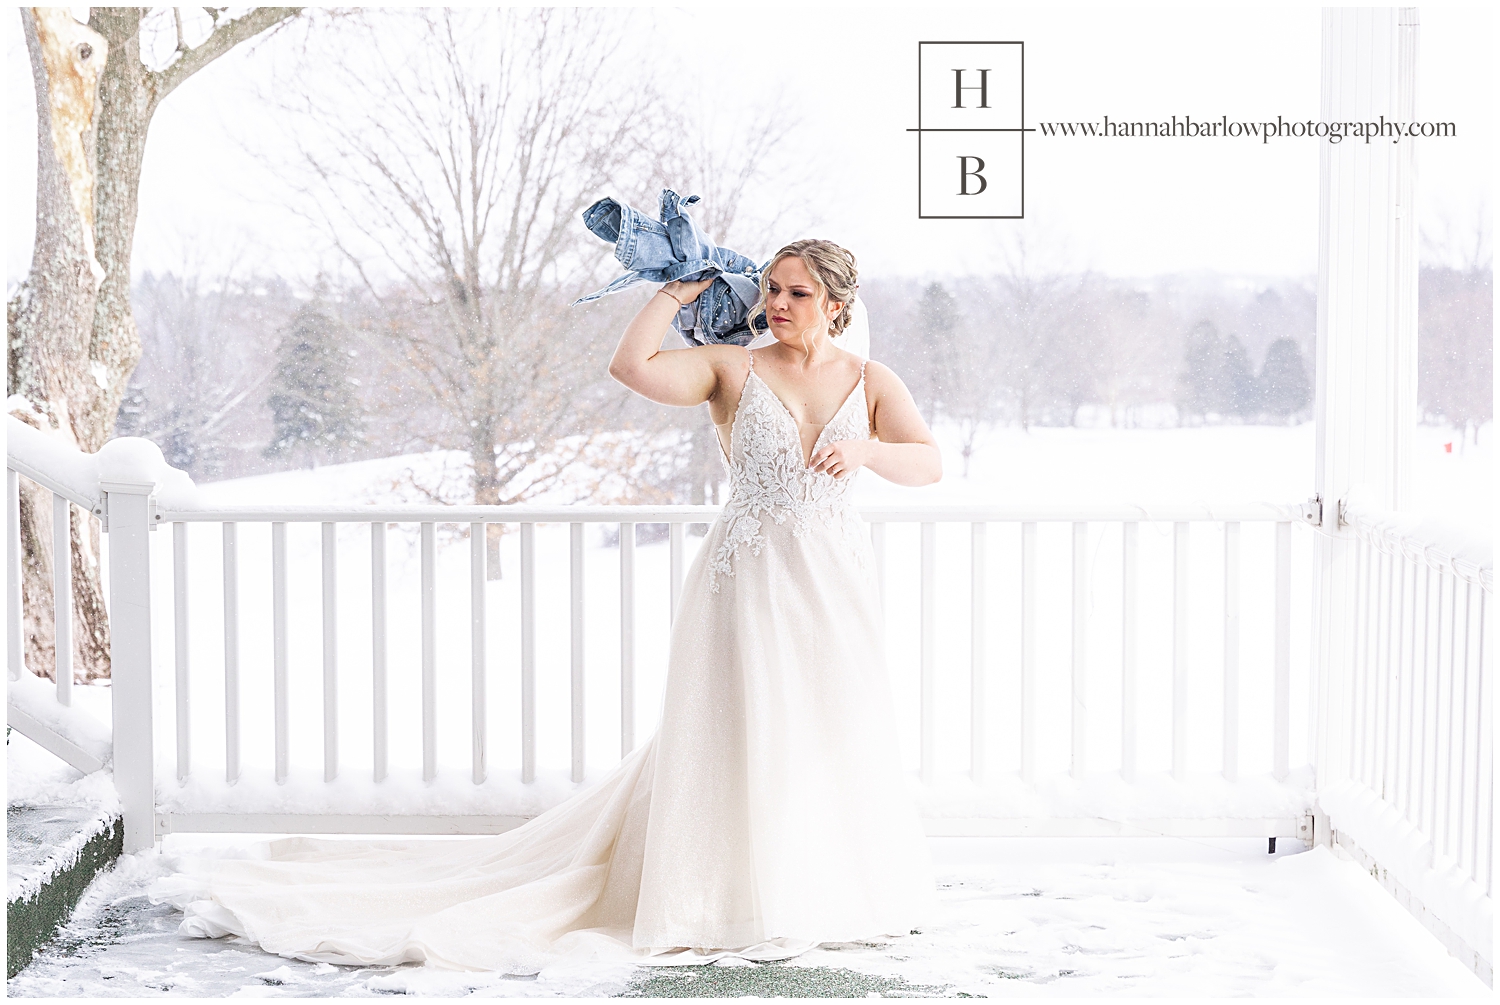 Bride in snowing wedding background throws jeans coat.